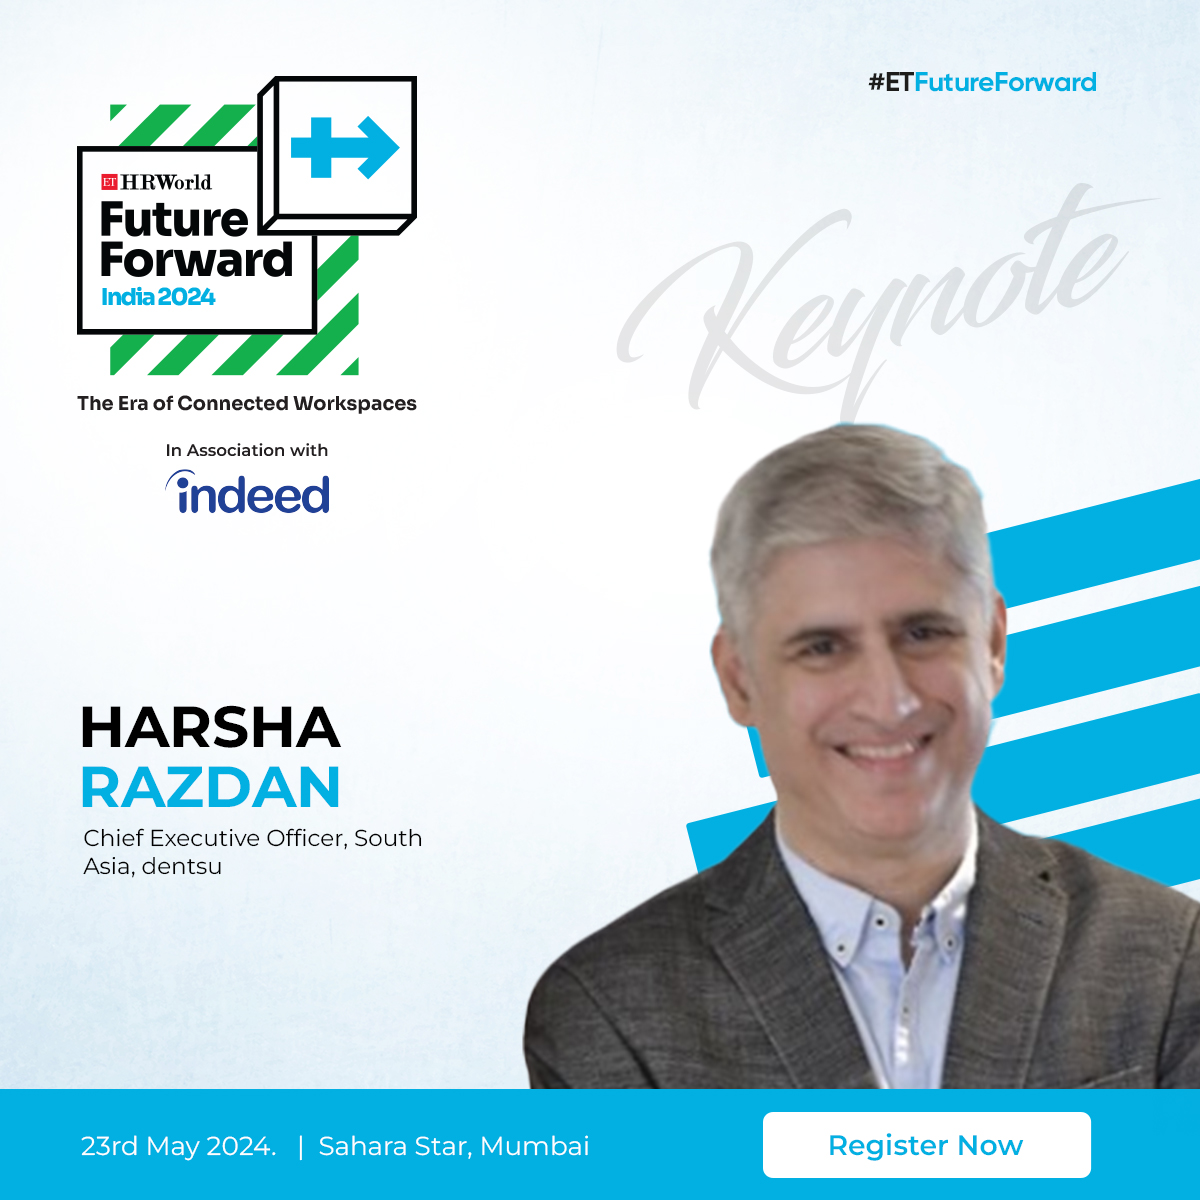 Delighted to announce @HarshaRazdan, Chief Executive Officer, South Asia, @DentsuIN, as our Keynote Speaker at #ETFutureForward 2024! Don't miss this opportunity to learn from the very best!

Register Now: bit.ly/49oakZp

#ETHRWorld #EconomicTimes #Summit #HR #HRLeaders